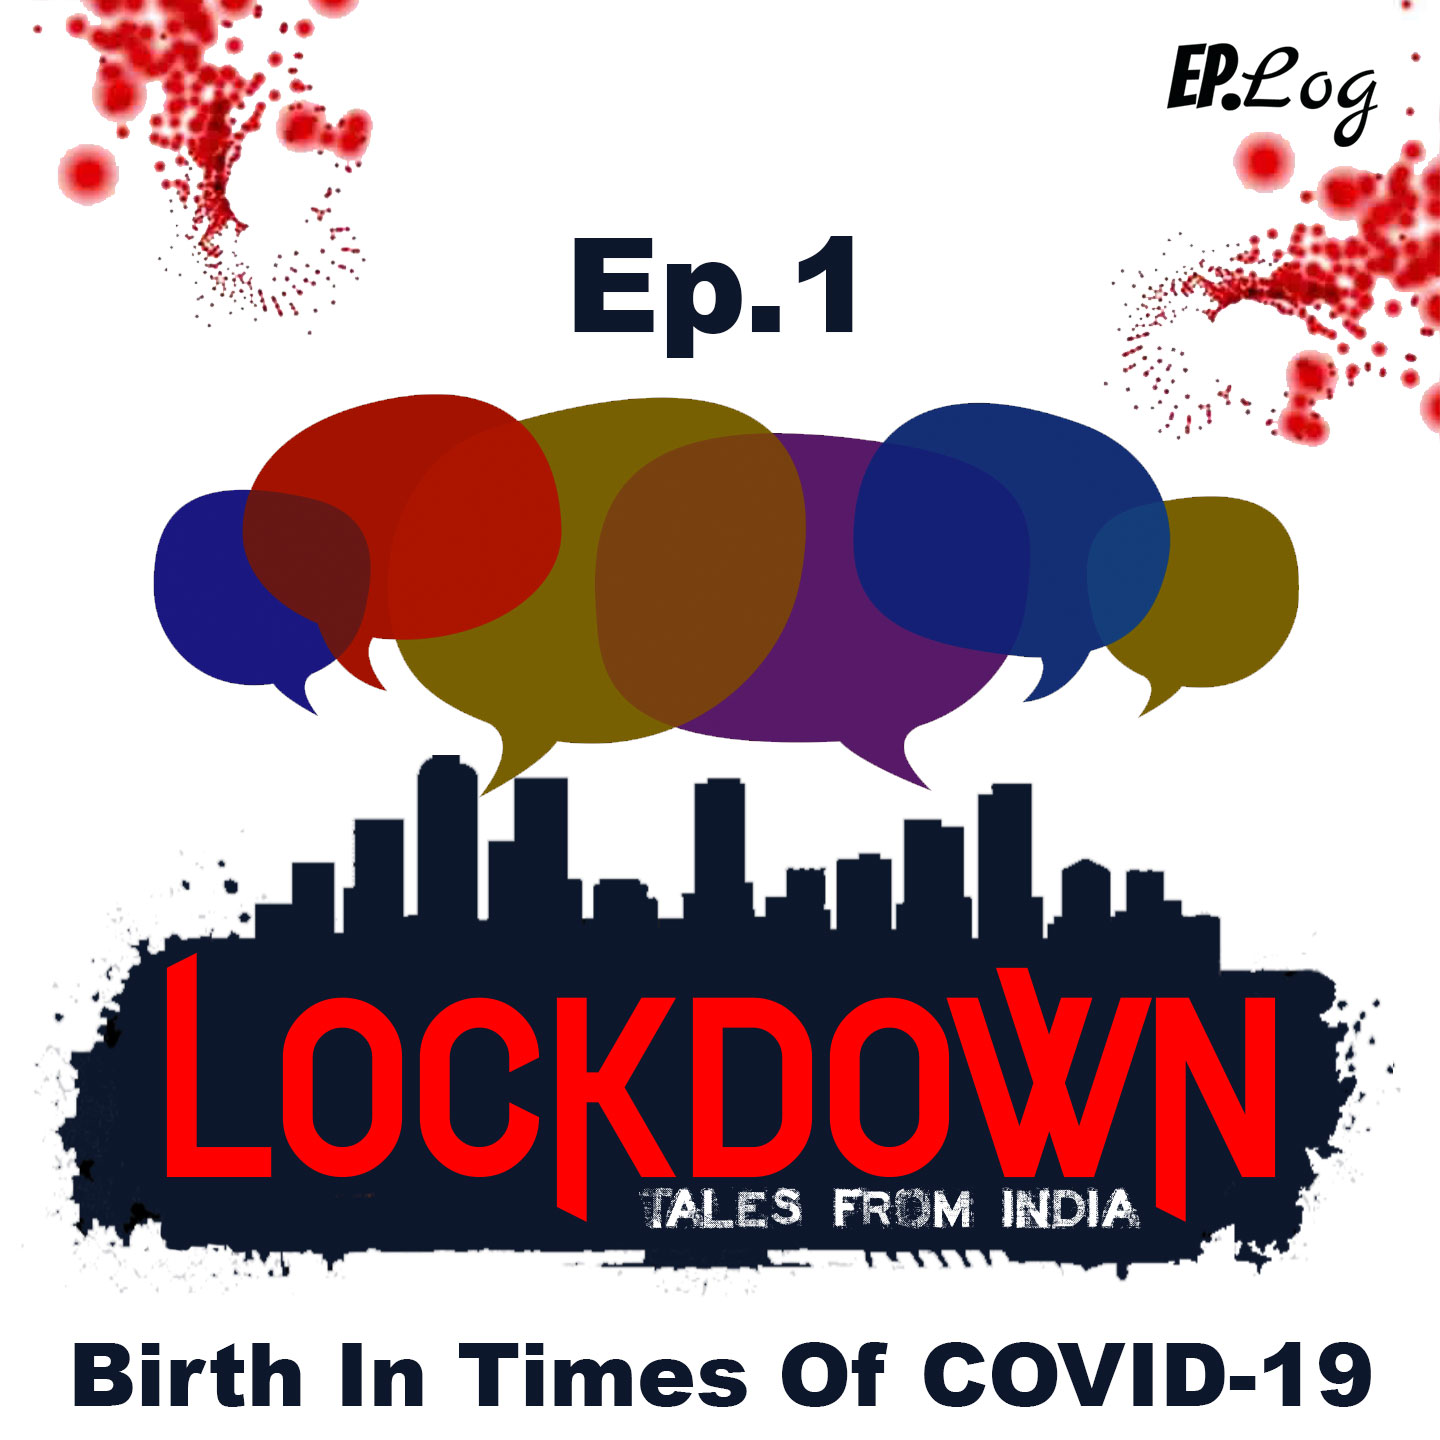 Birth In The Times Of COVID-19